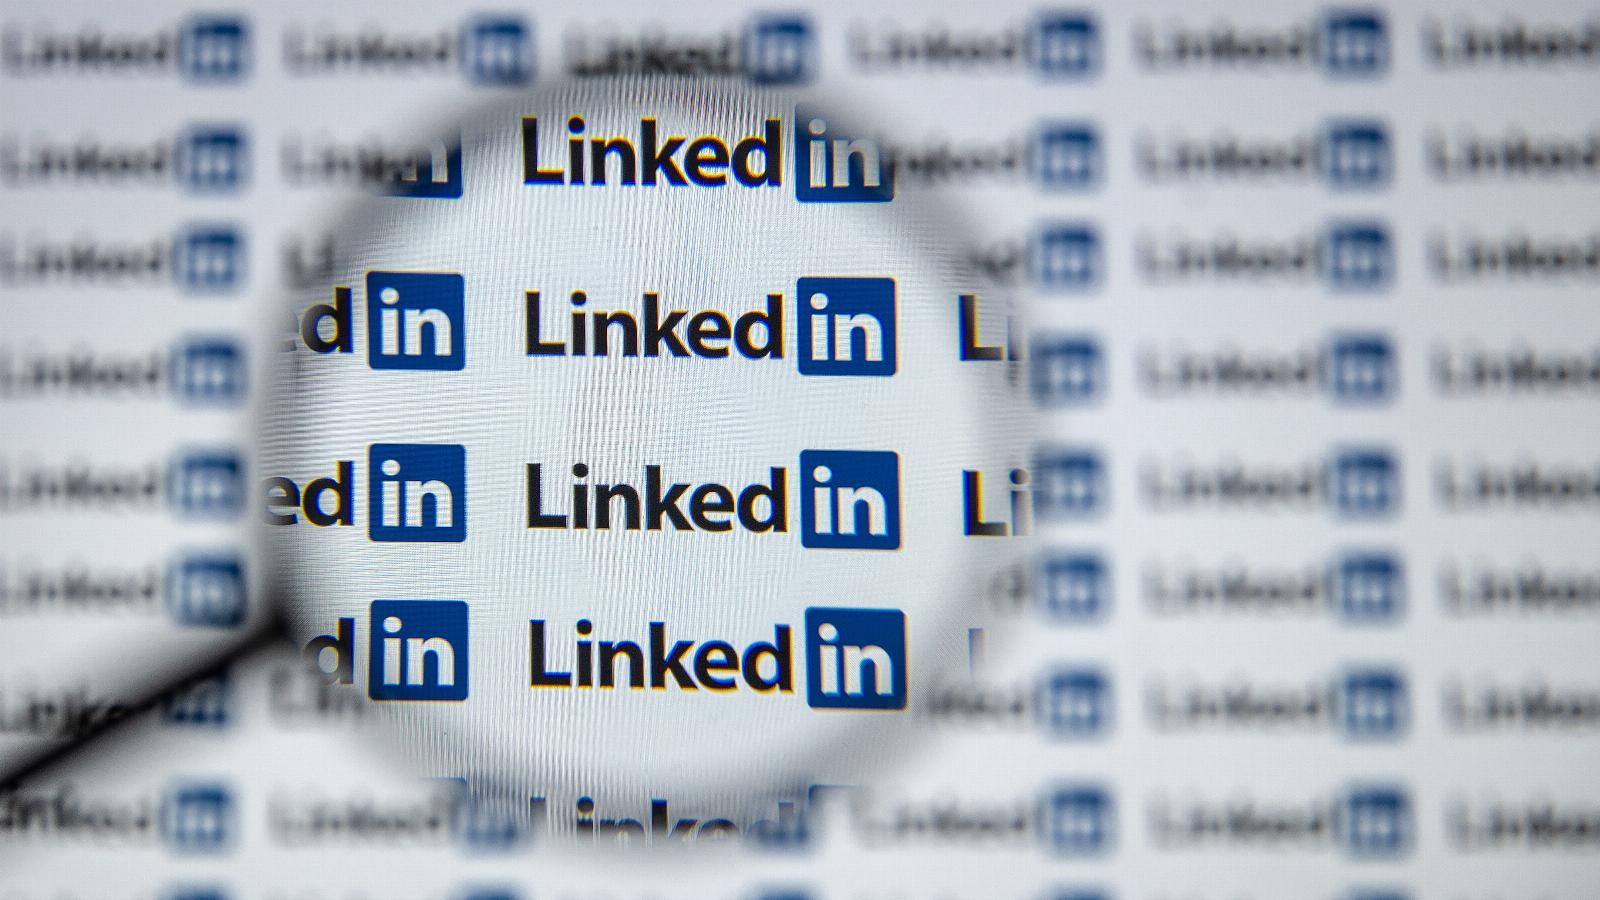 LinkedIn rolls out new job search features to make it easier to find relevant opportunities